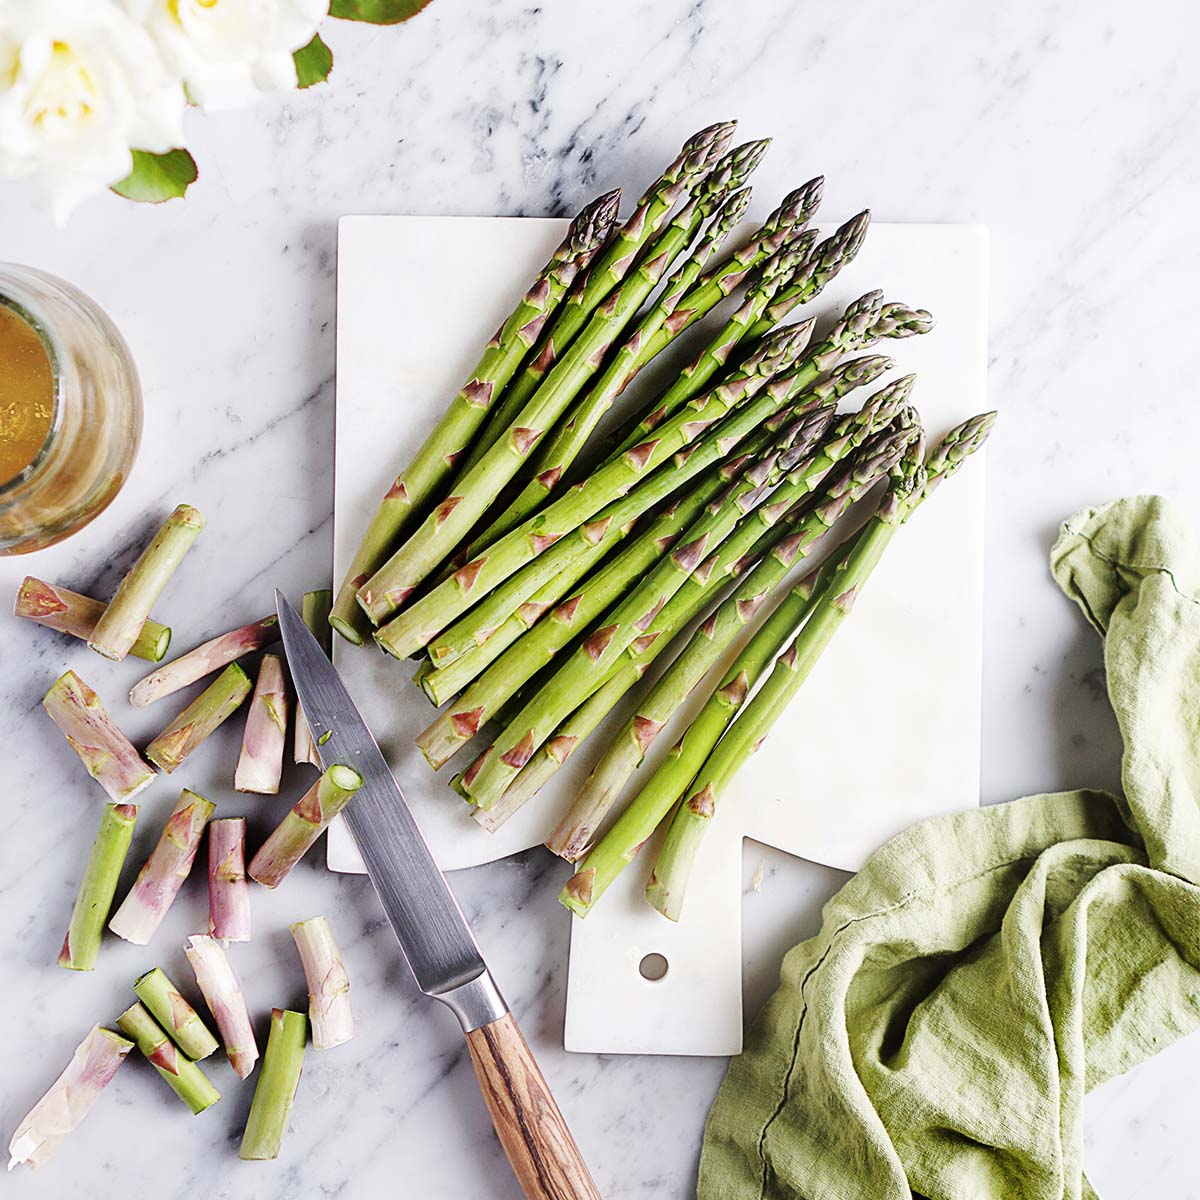 A bunch of asparagus on a cutting board with a knife on the side.